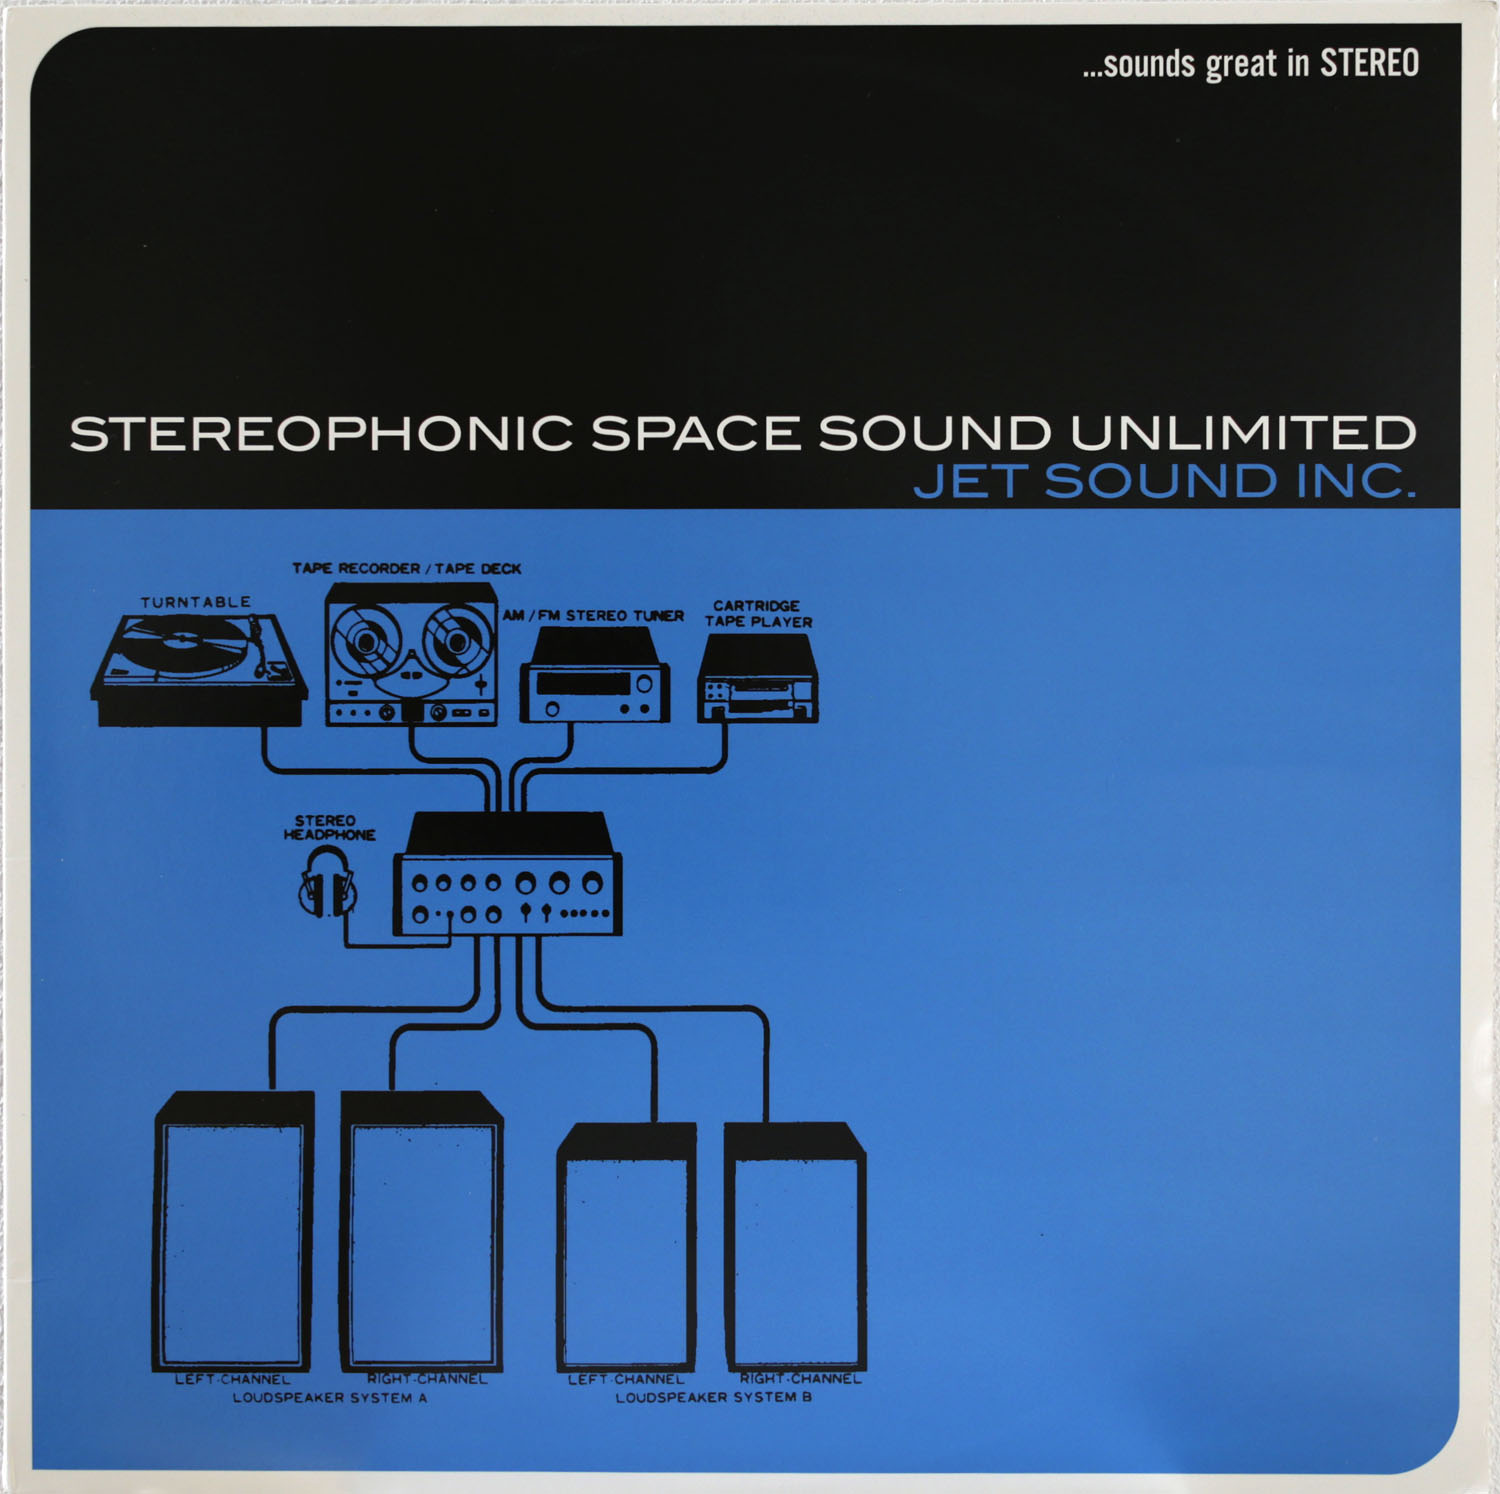  Stereophonic Space Sound Unlimited  Jet Sound Inc 